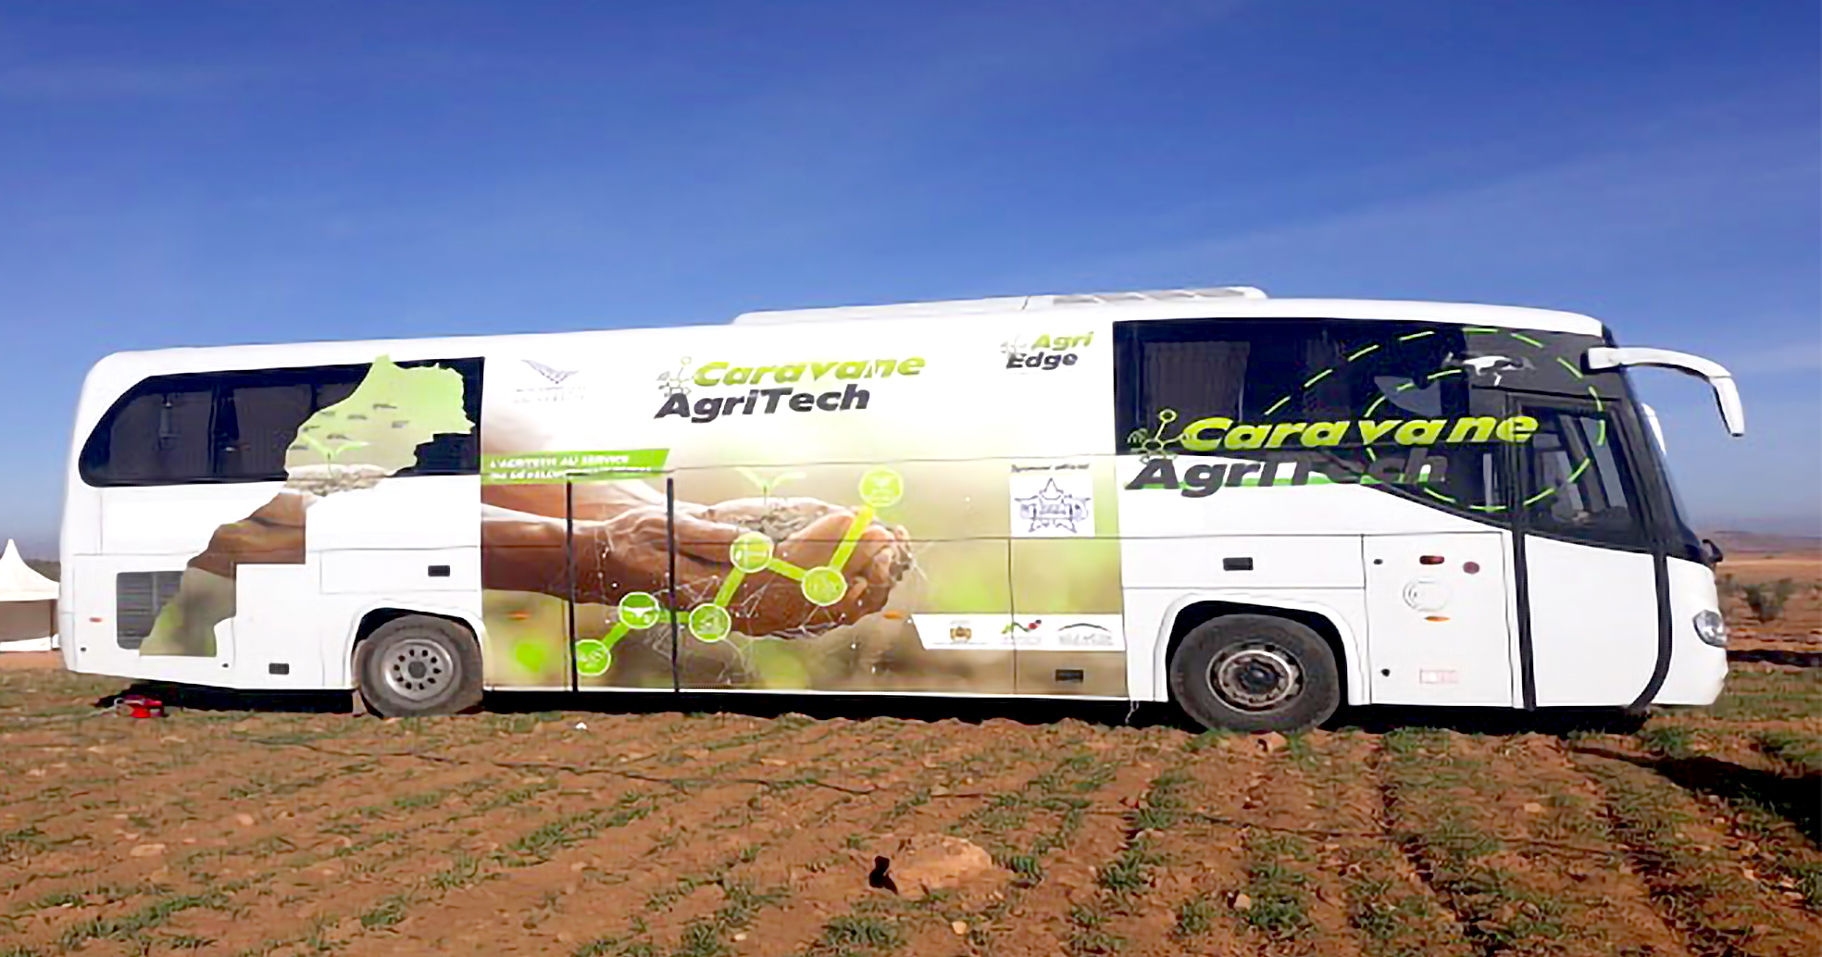 the agricultural technology convoy “AgriTech” which aims at putting digital technology in the service of small farmers was launched on Thursday December 24th.